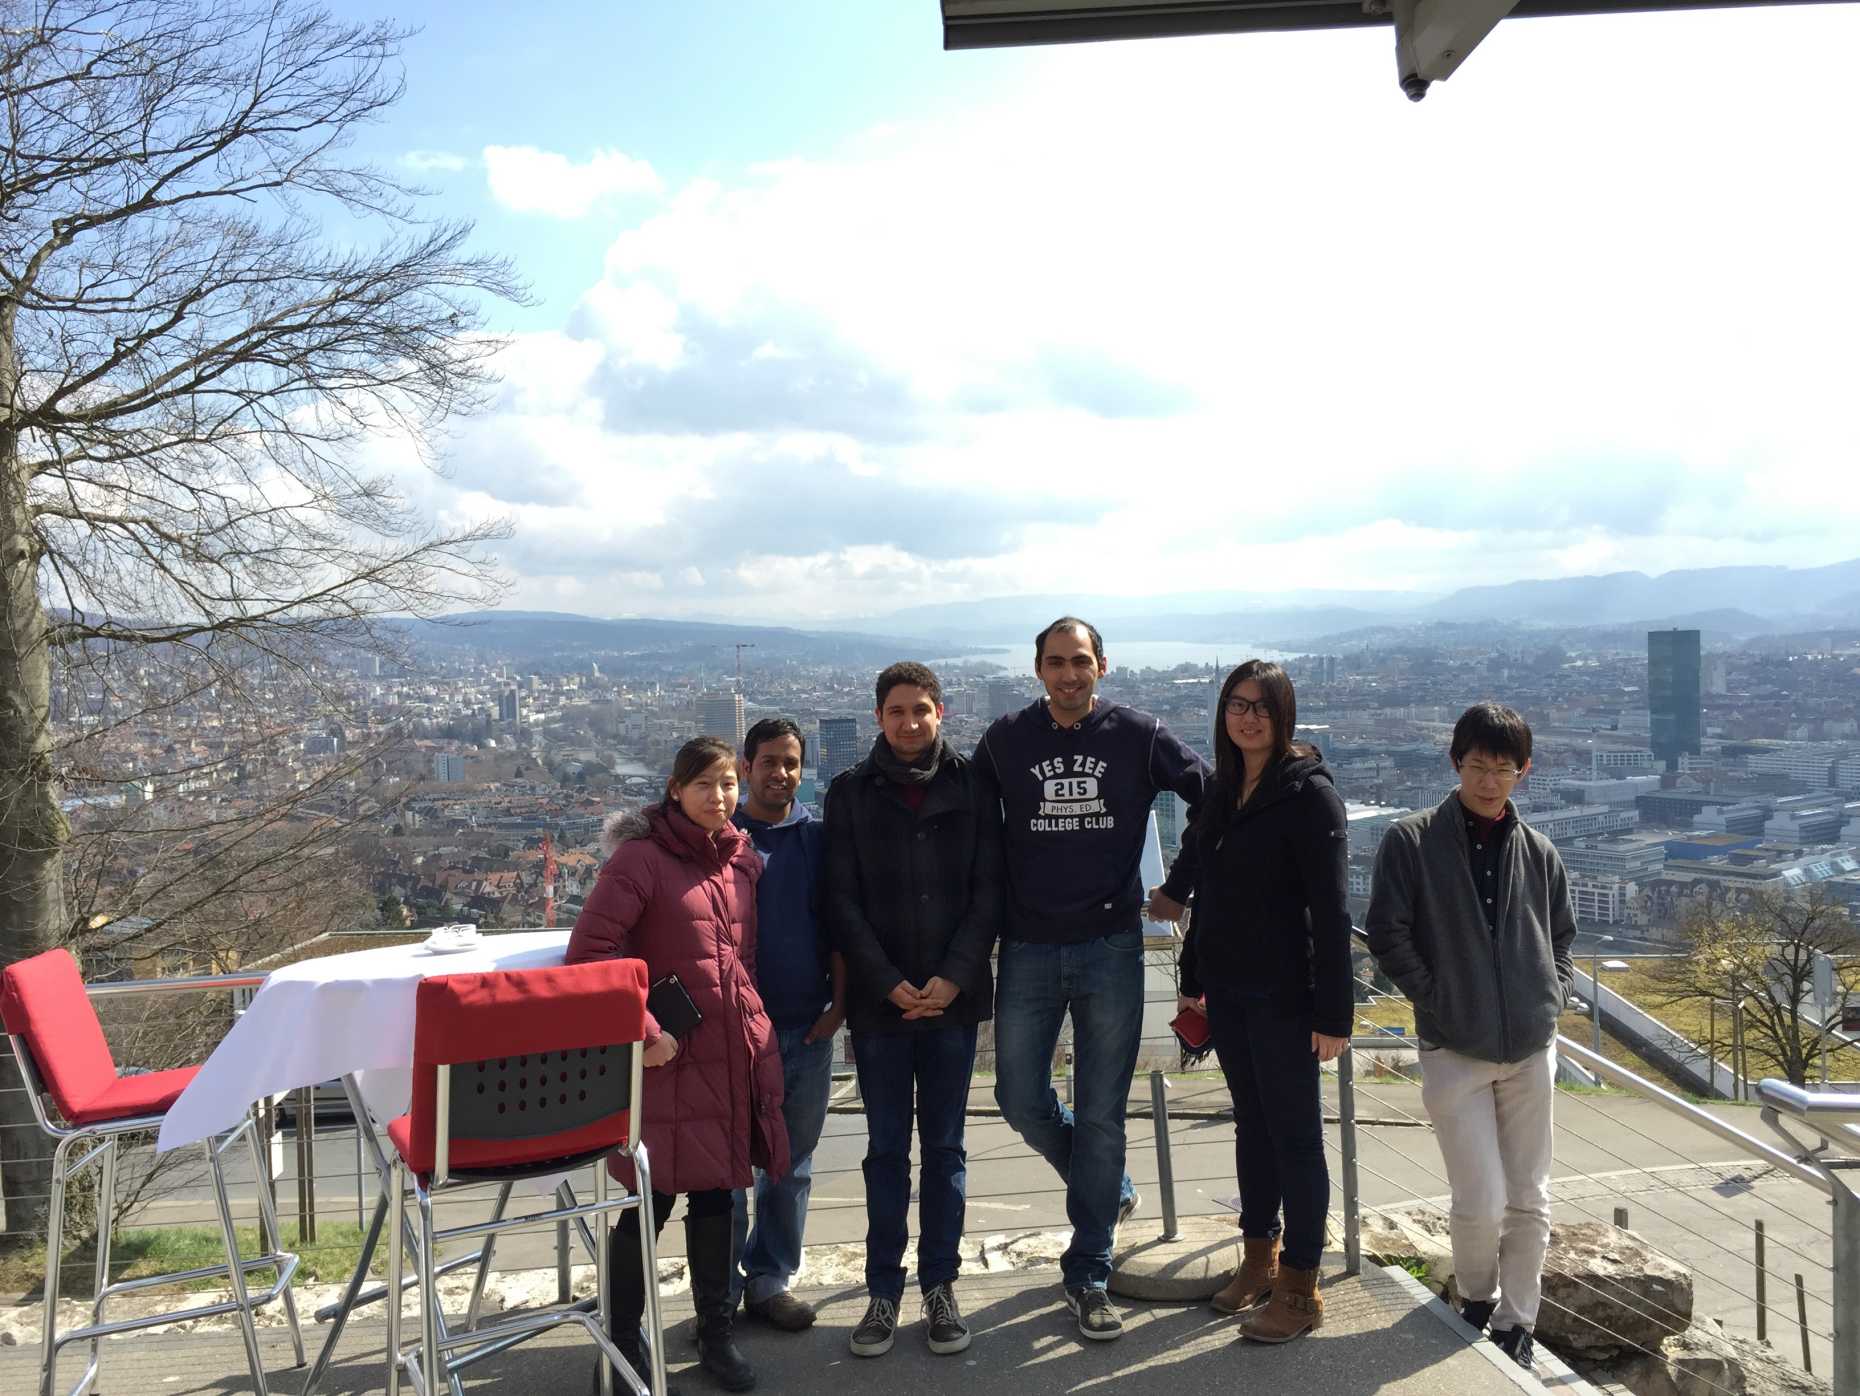 Enlarged view: group lunch 2015 winter